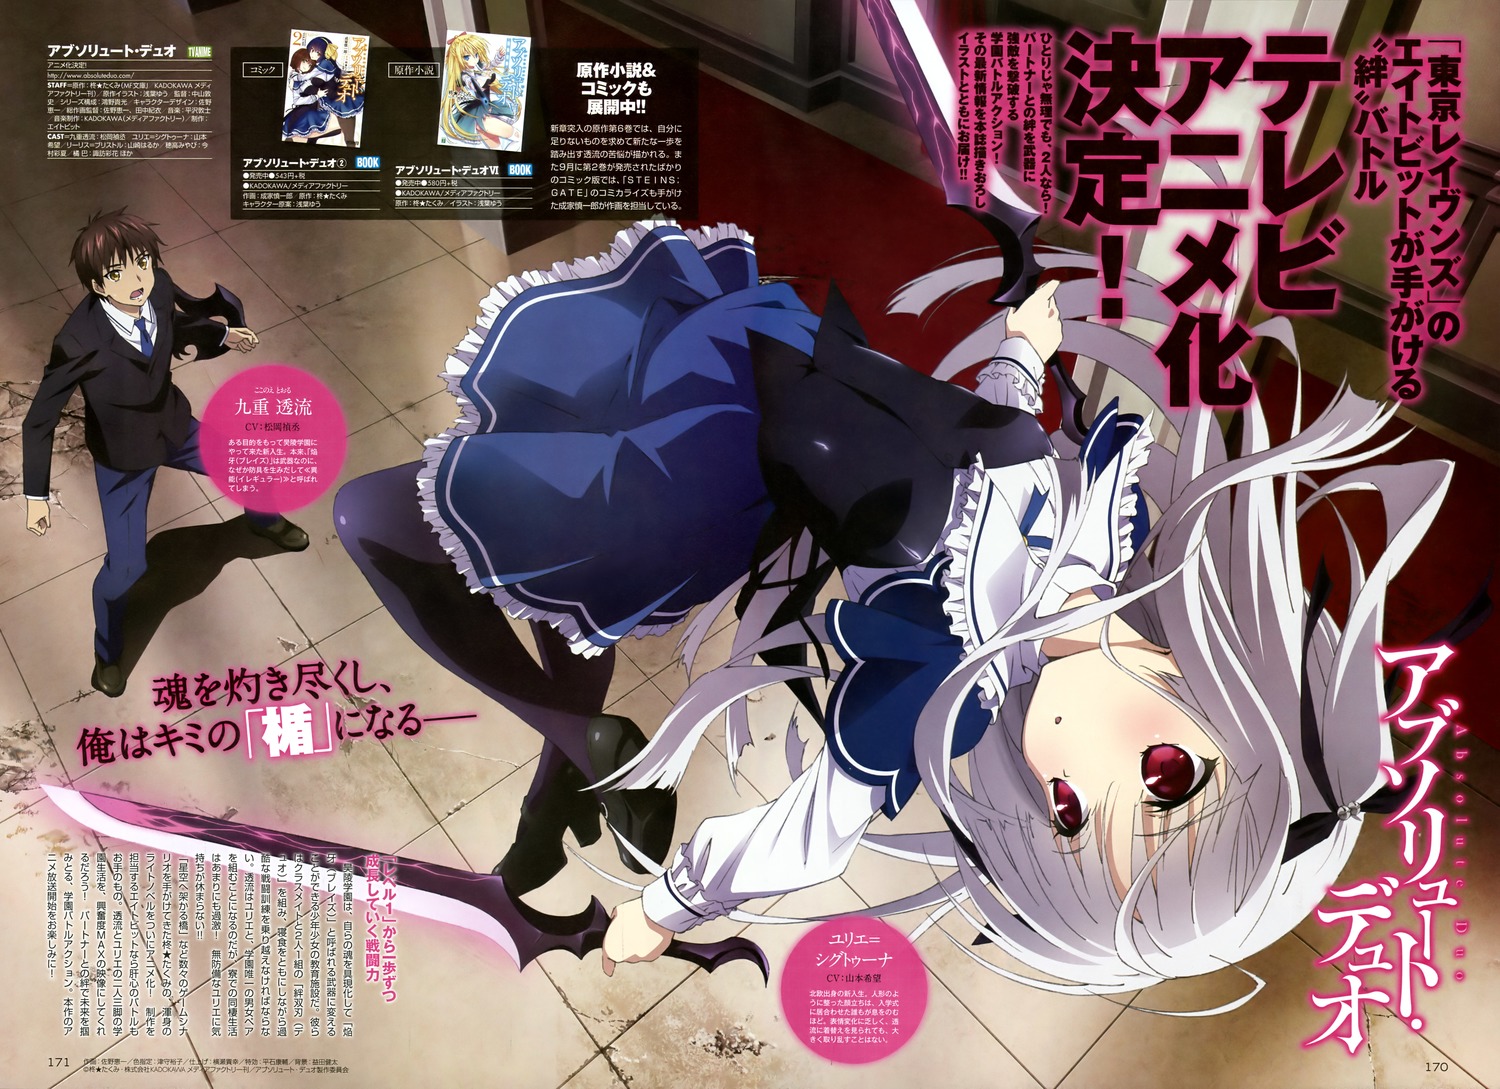 Absolute Duo Key Visual Revealed in Japanese Magazine Comptiq - Haruhichan